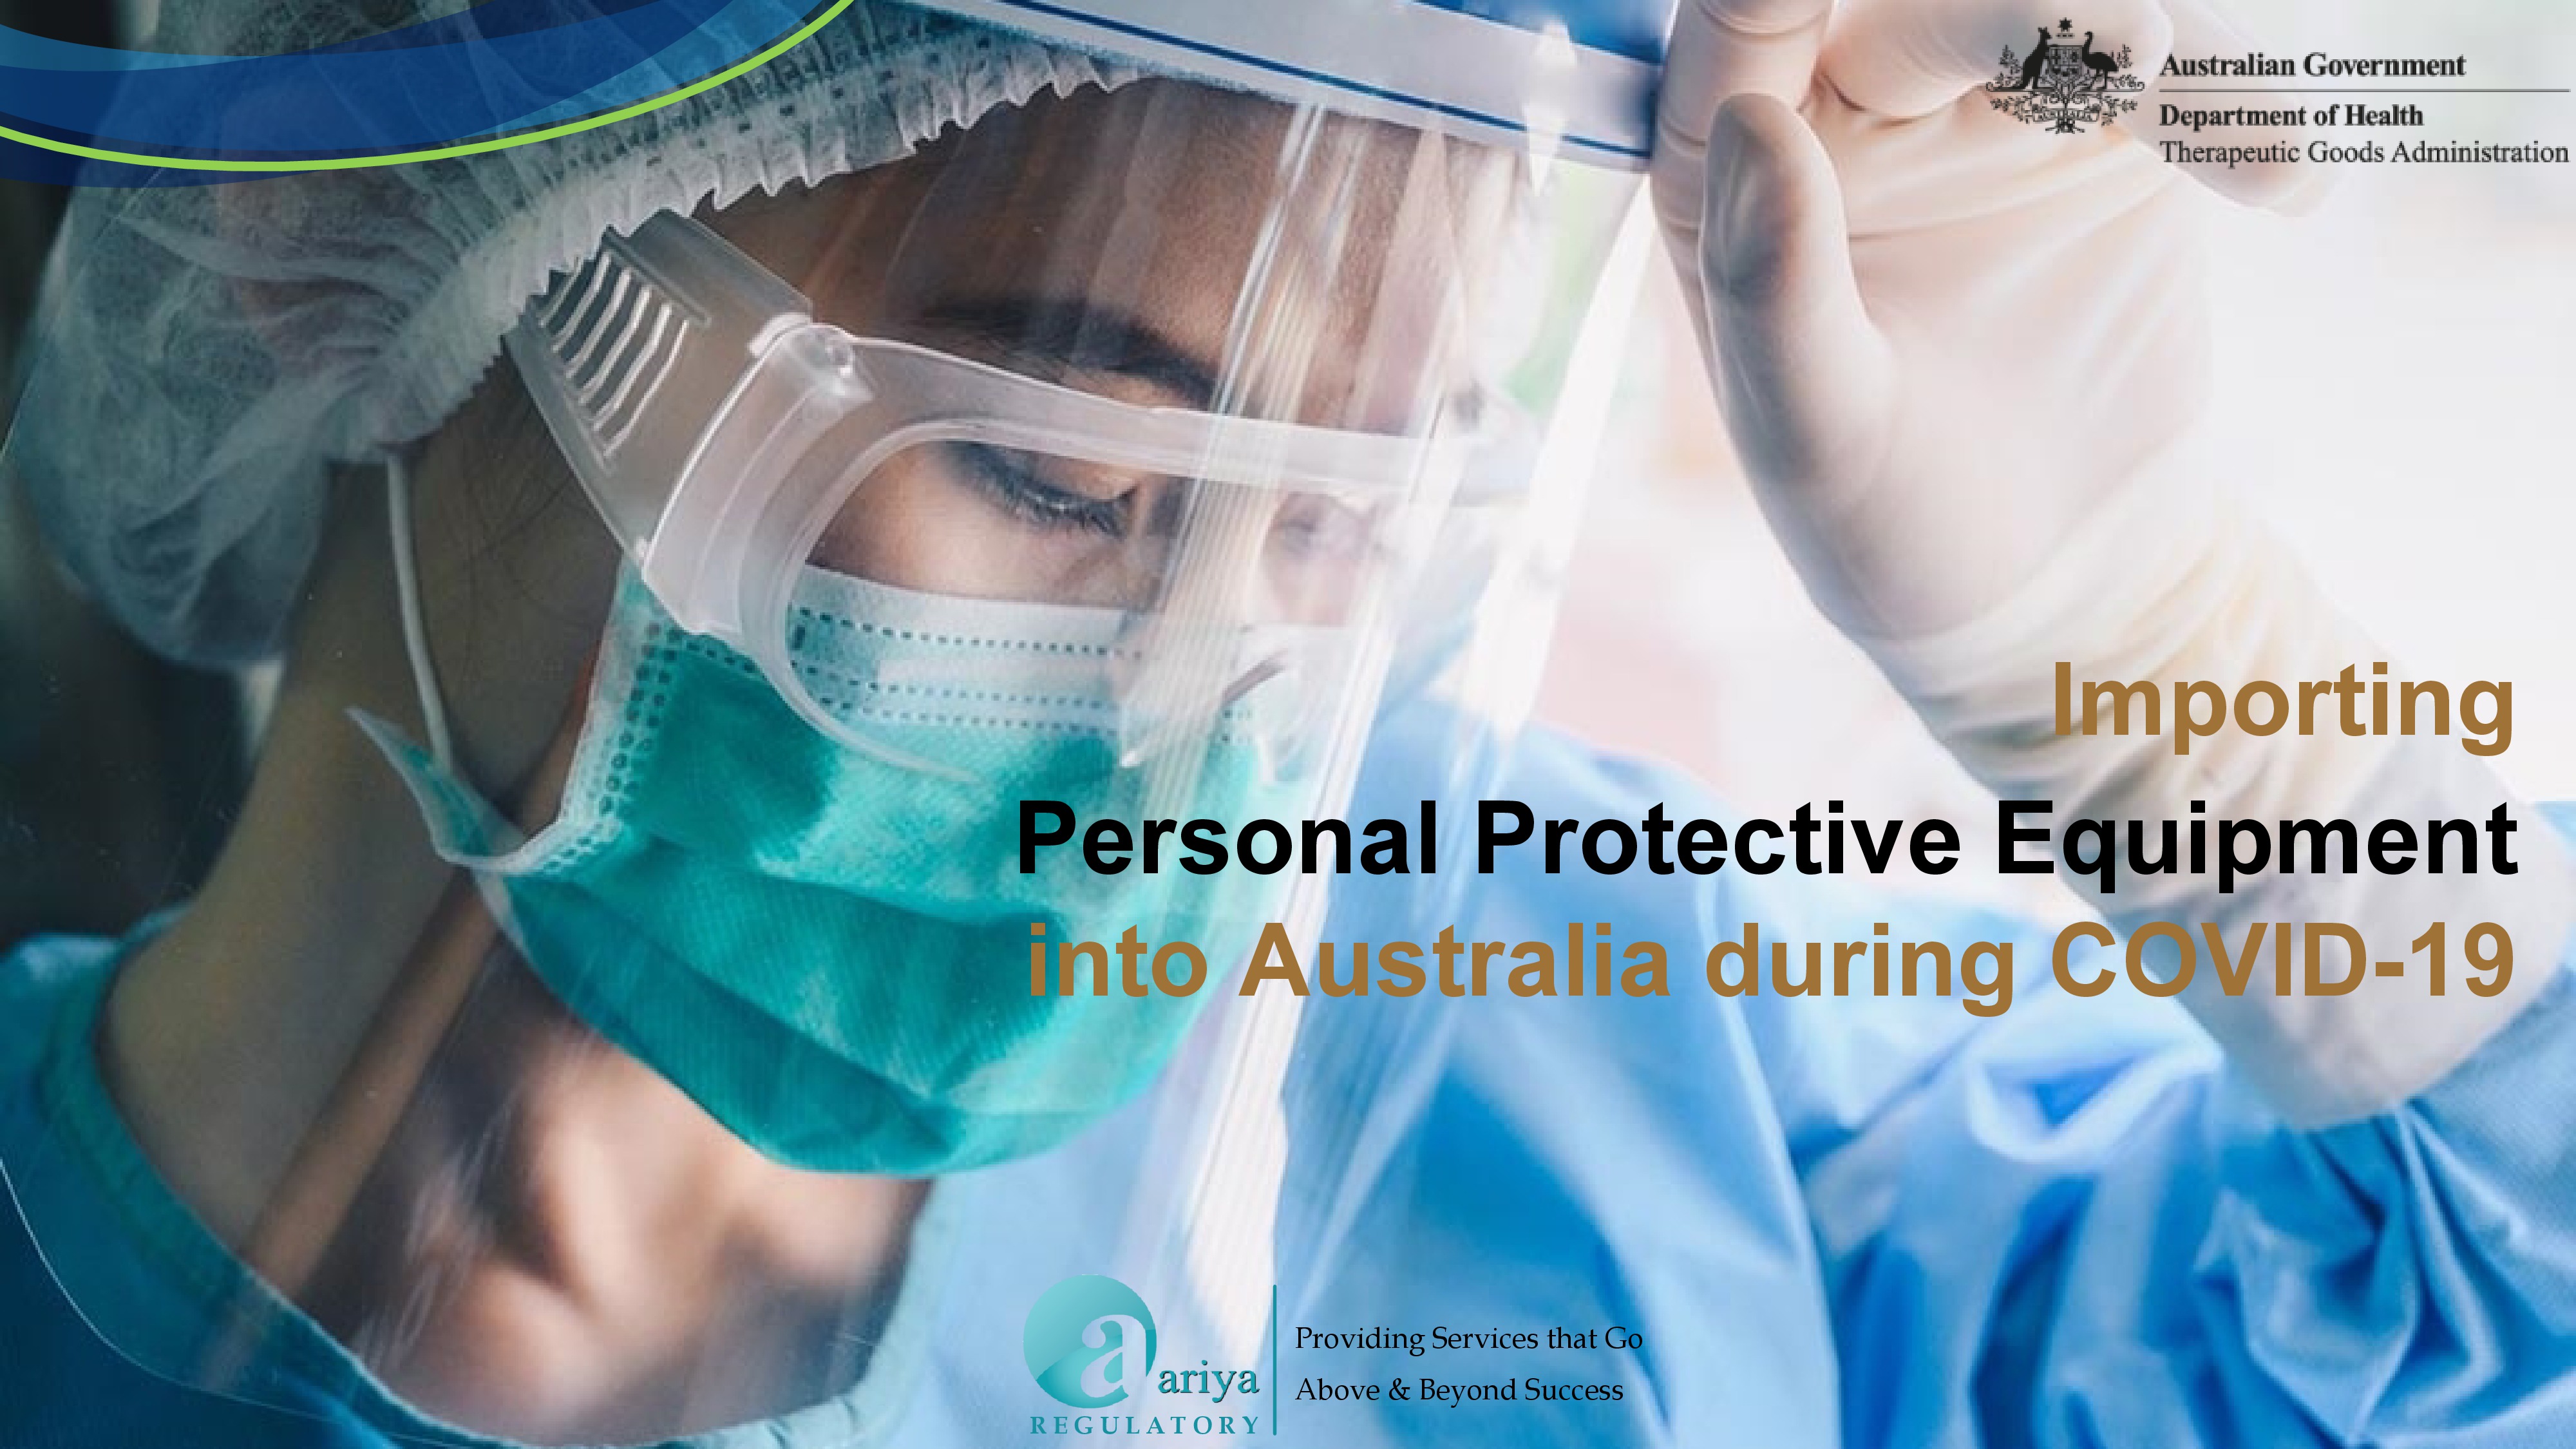 Importing Personal Protective Equipment into Australia during the COVID-19 Pandemic